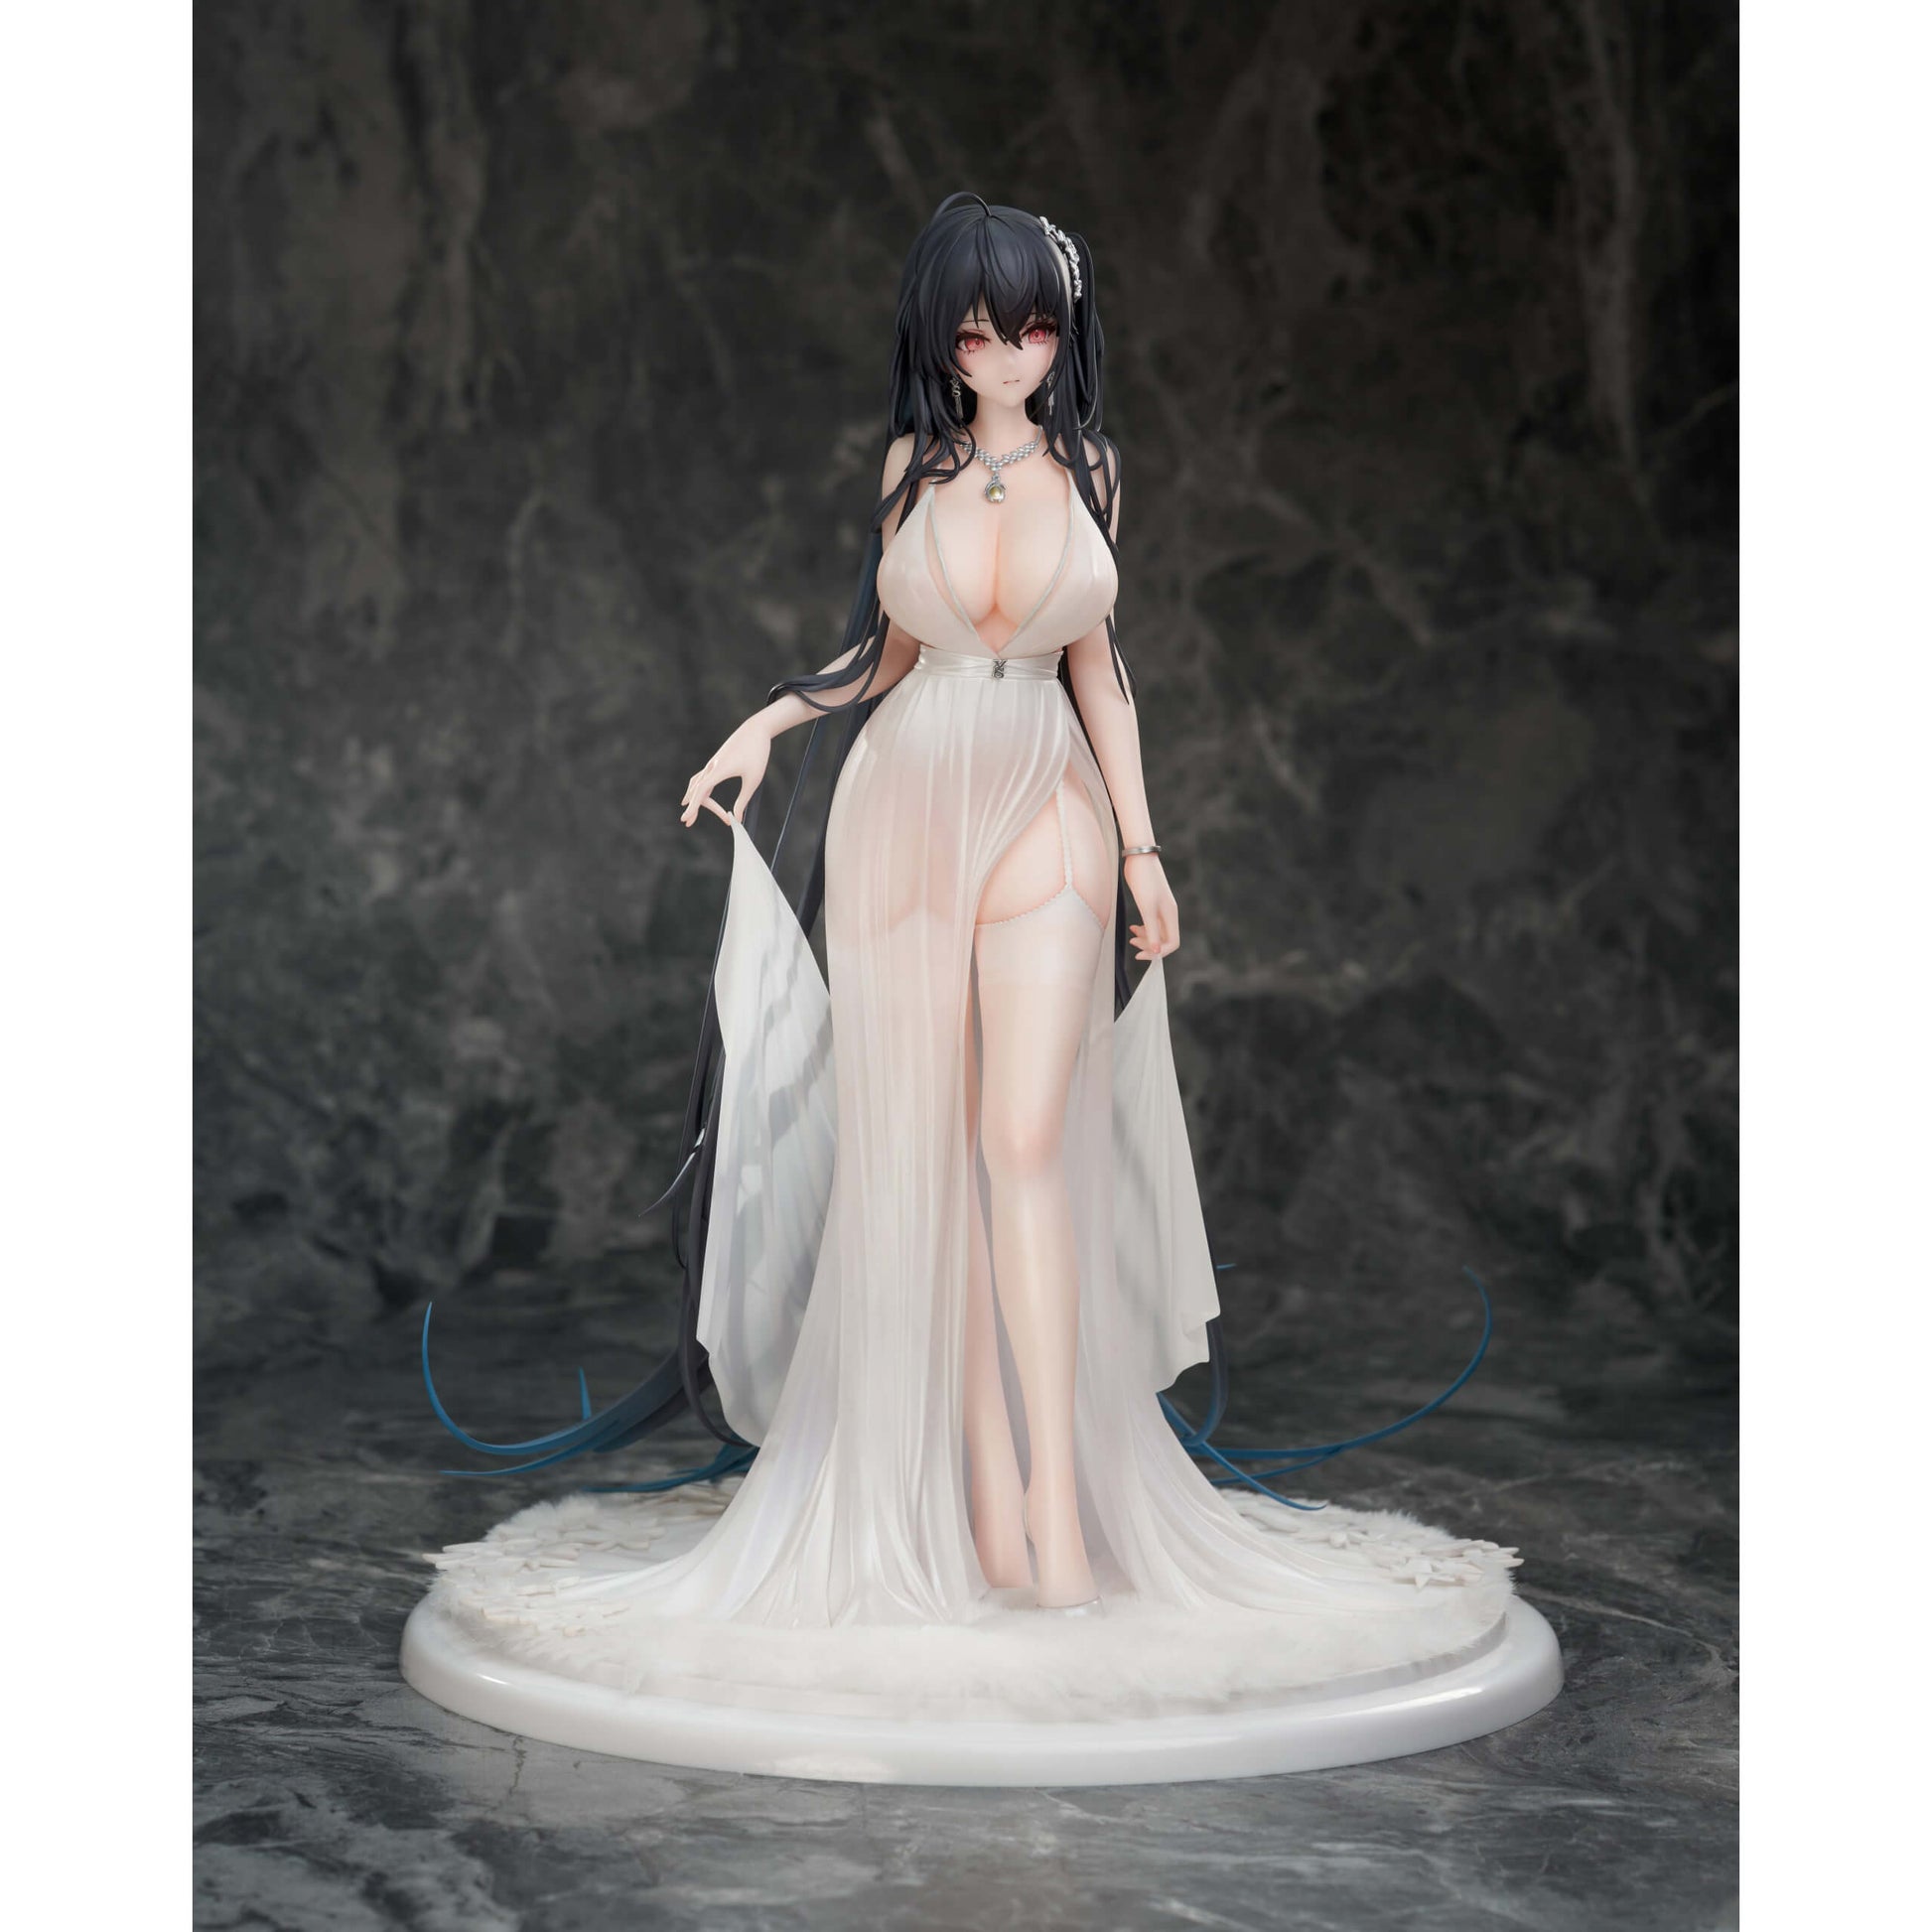 ANIGAME "AZUR LANE" TAIHOU OATH: TEMPTATION ON THE SEA BREEZE VER. 1/6 SCALE FIGURE DELUXE SET OF TWO | animota